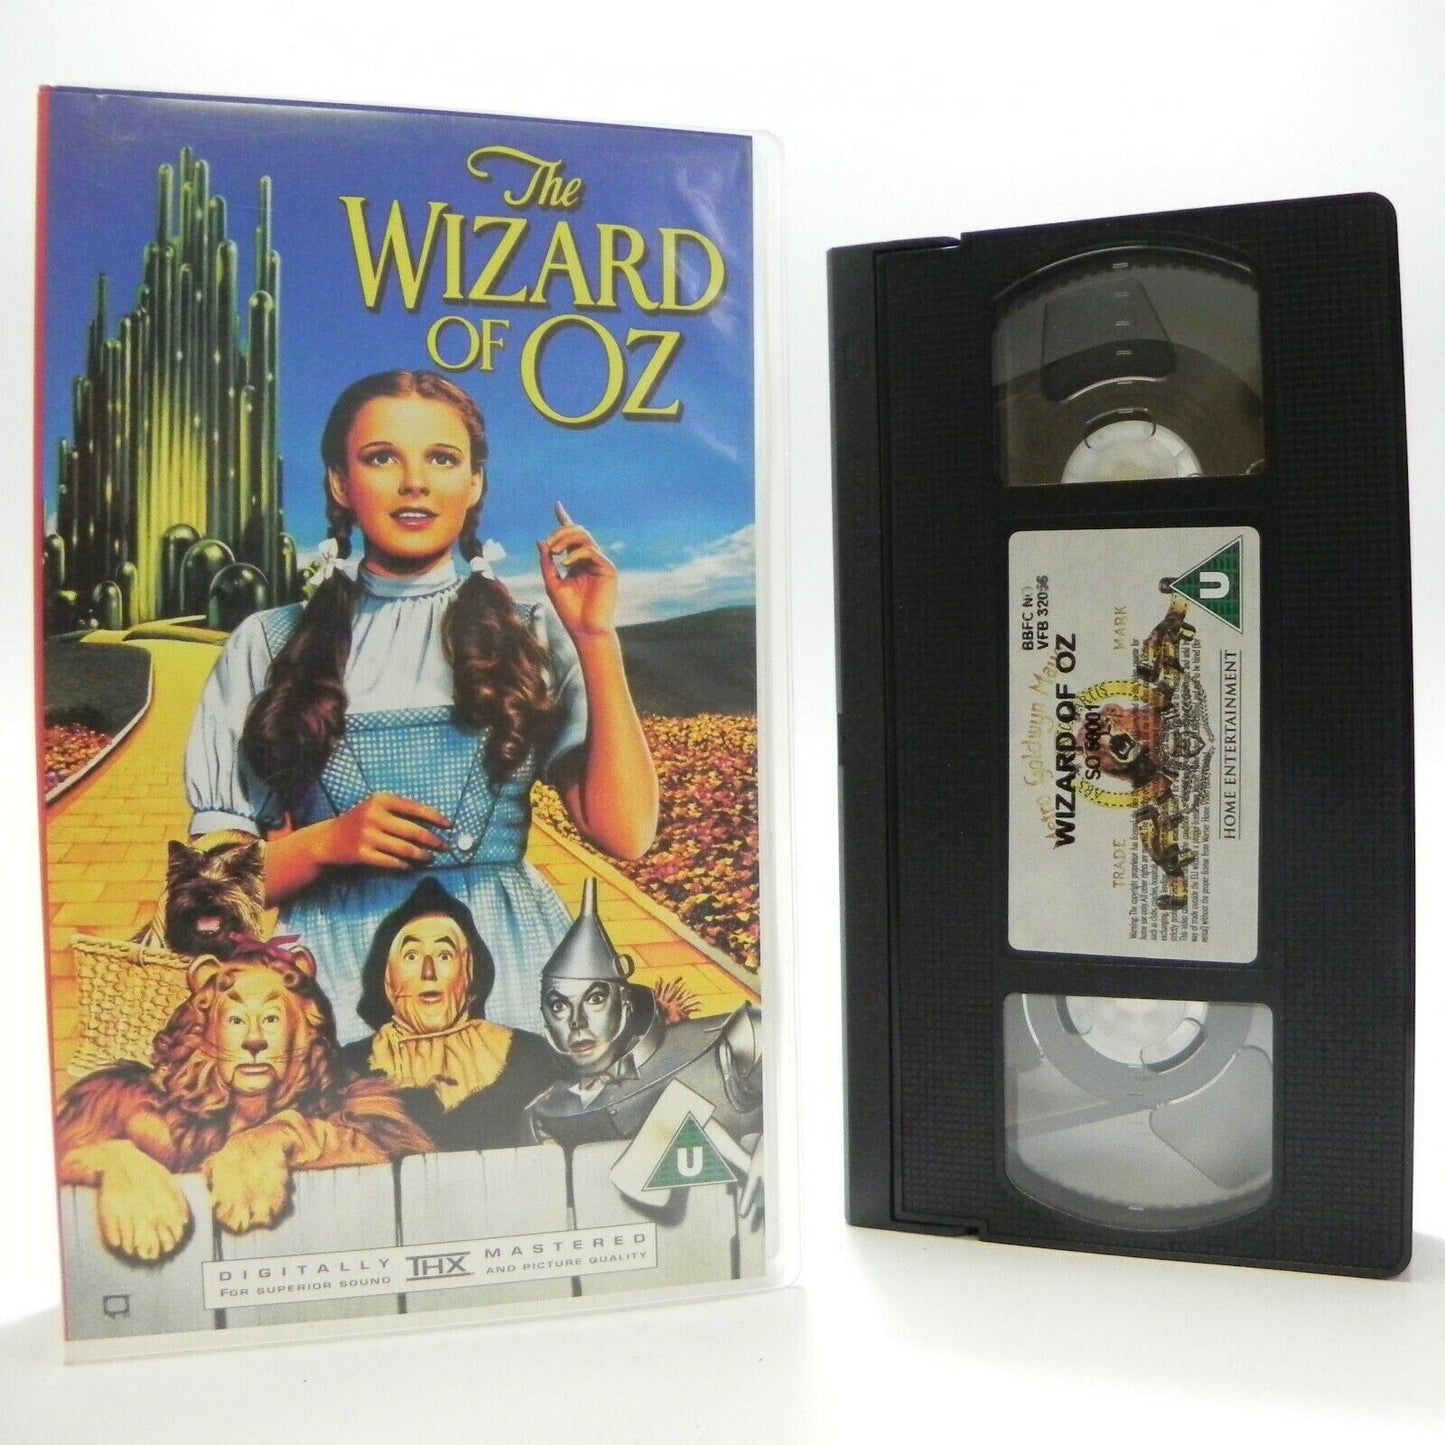 The Wizard Of Oz - MGM Digitally Remastered - Children's Fantasy Adventure - VHS-